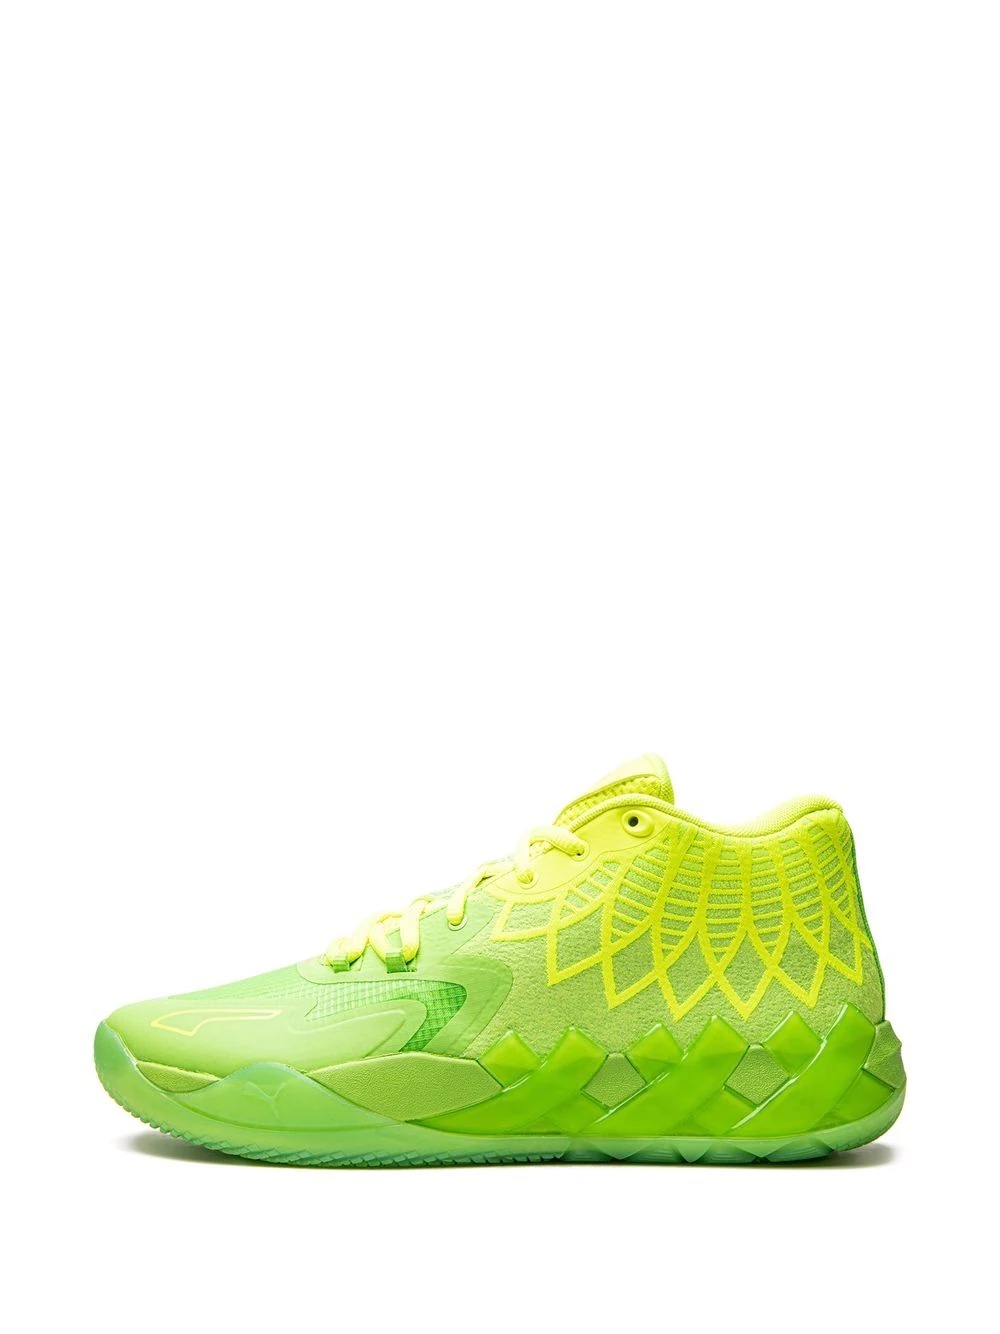 x Rick and Morty MB.01 LaMelo Ball sneakers - 5